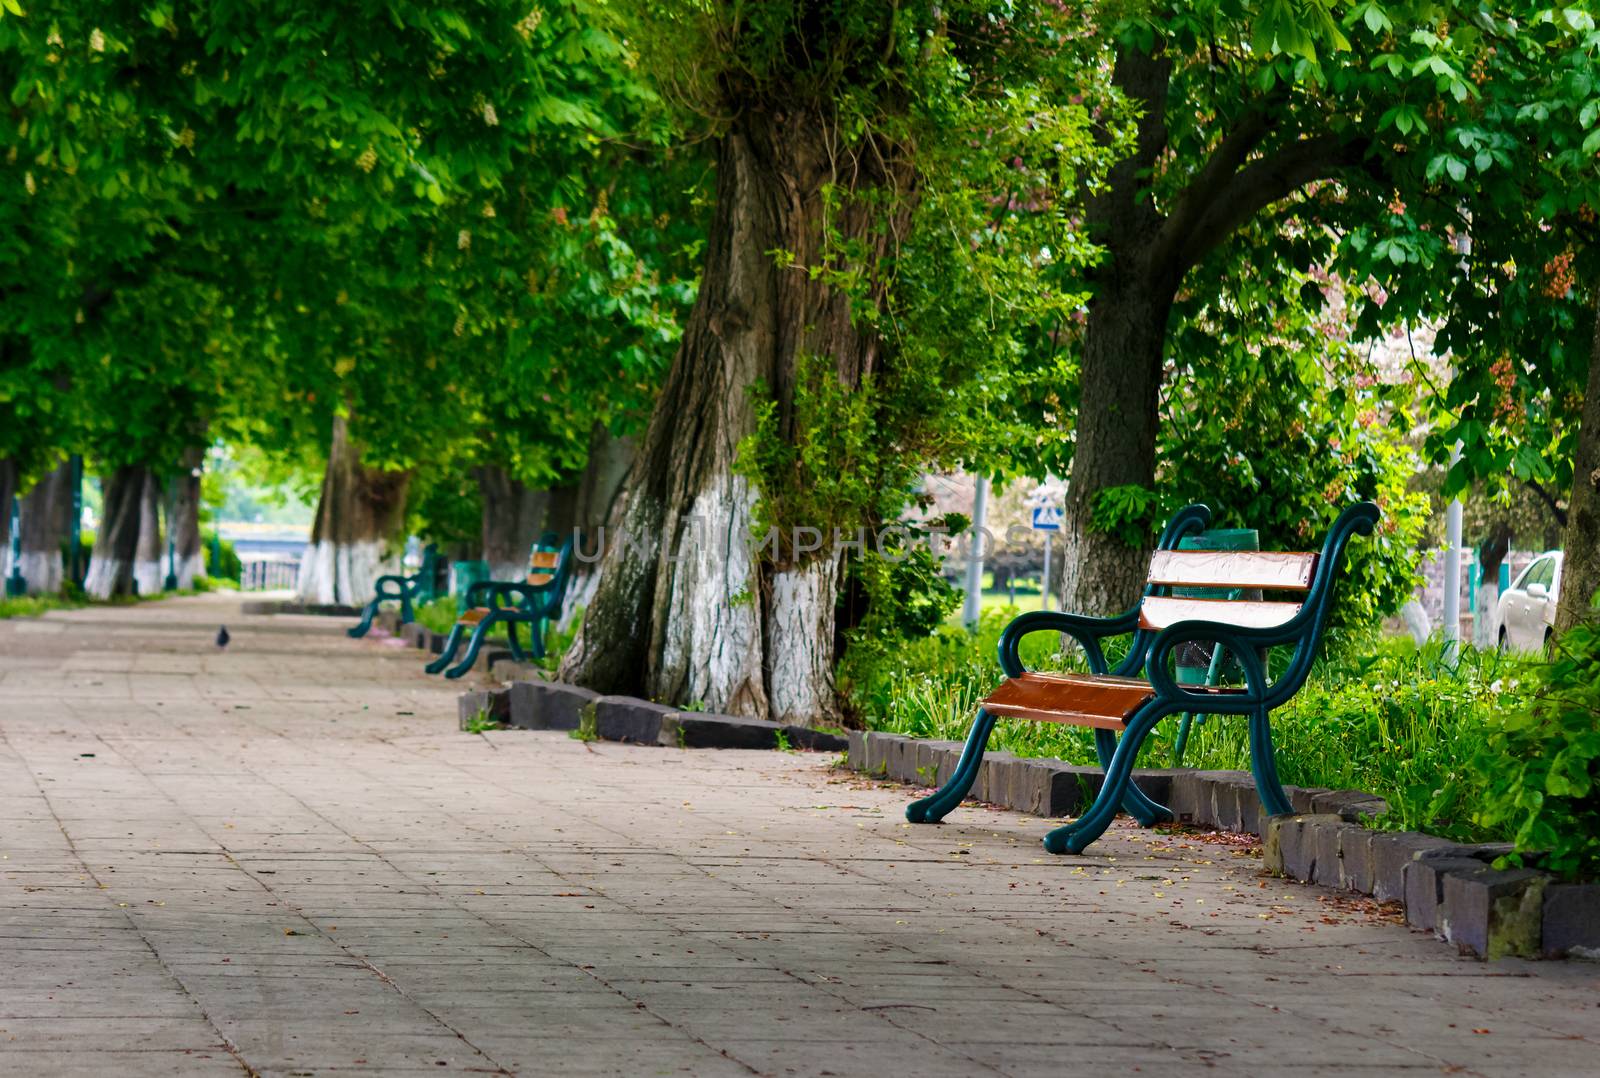 bench in the shade of chestnut alley. lovely urban scenery in summer